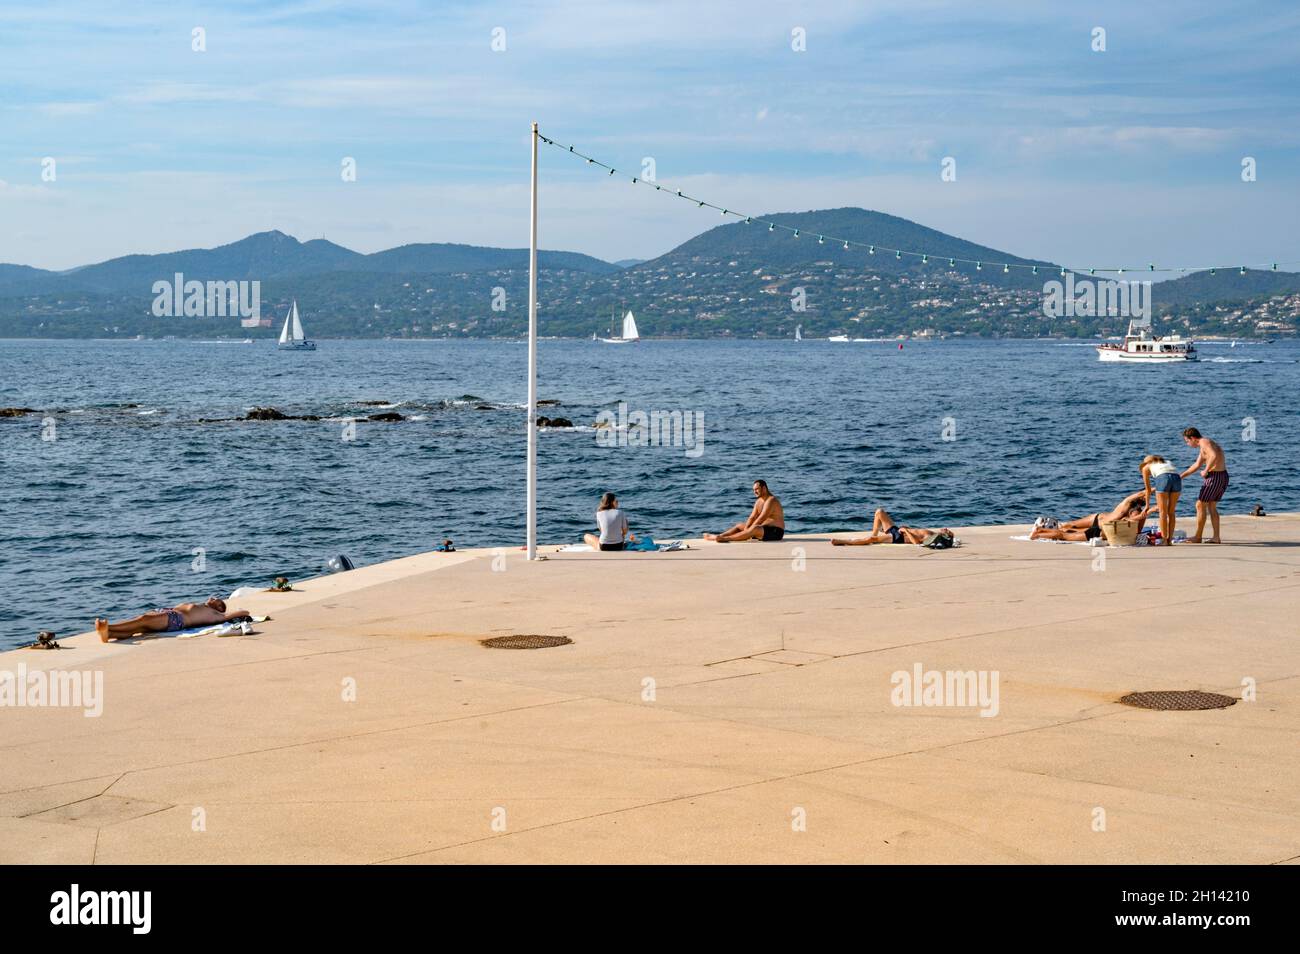 People sunbathing and enjoying the view across the bay of Saint-Tropez, France Stock Photo